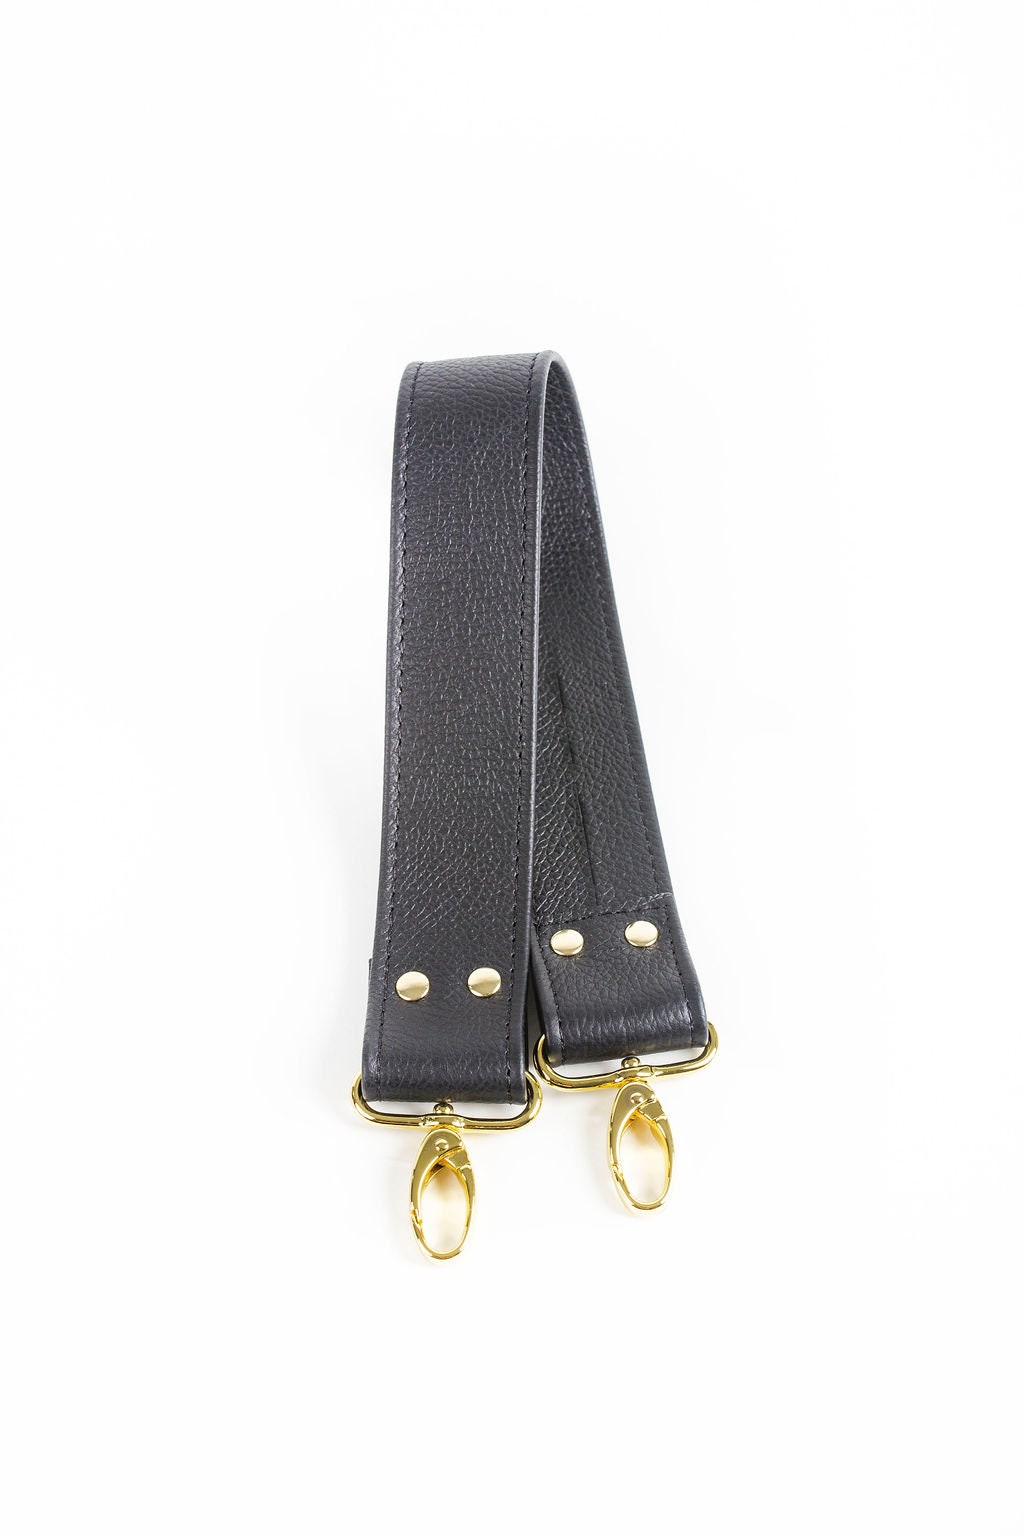 Black Leather Bag Strap, Replacement Strap, Leather Handbag Strap, Leather  Purse Strap, Black Strap, 1' Black Leather 